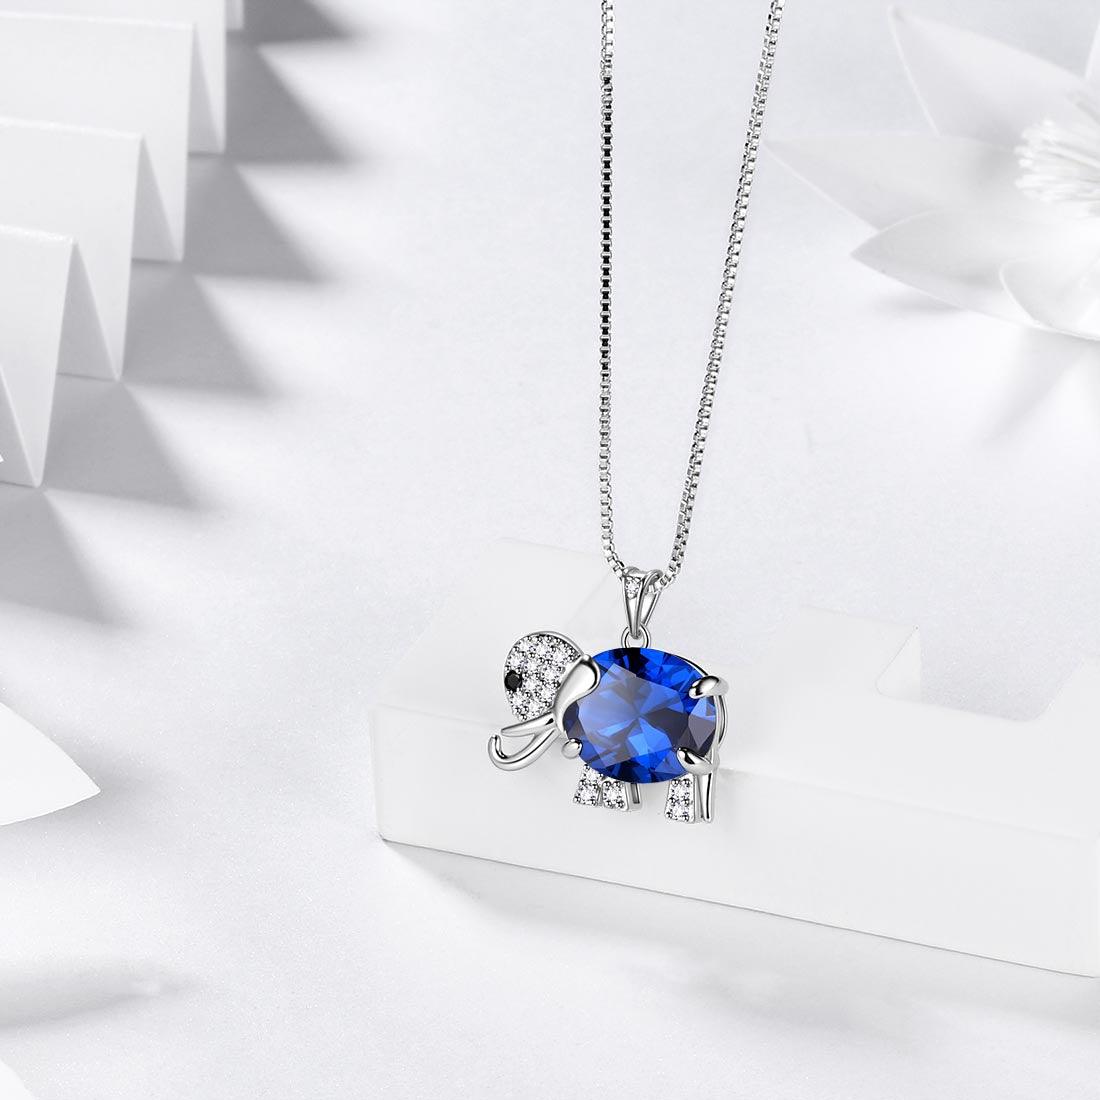 September Birthstone Necklace - Sapphire - Buy Women's Necklaces - Billy J